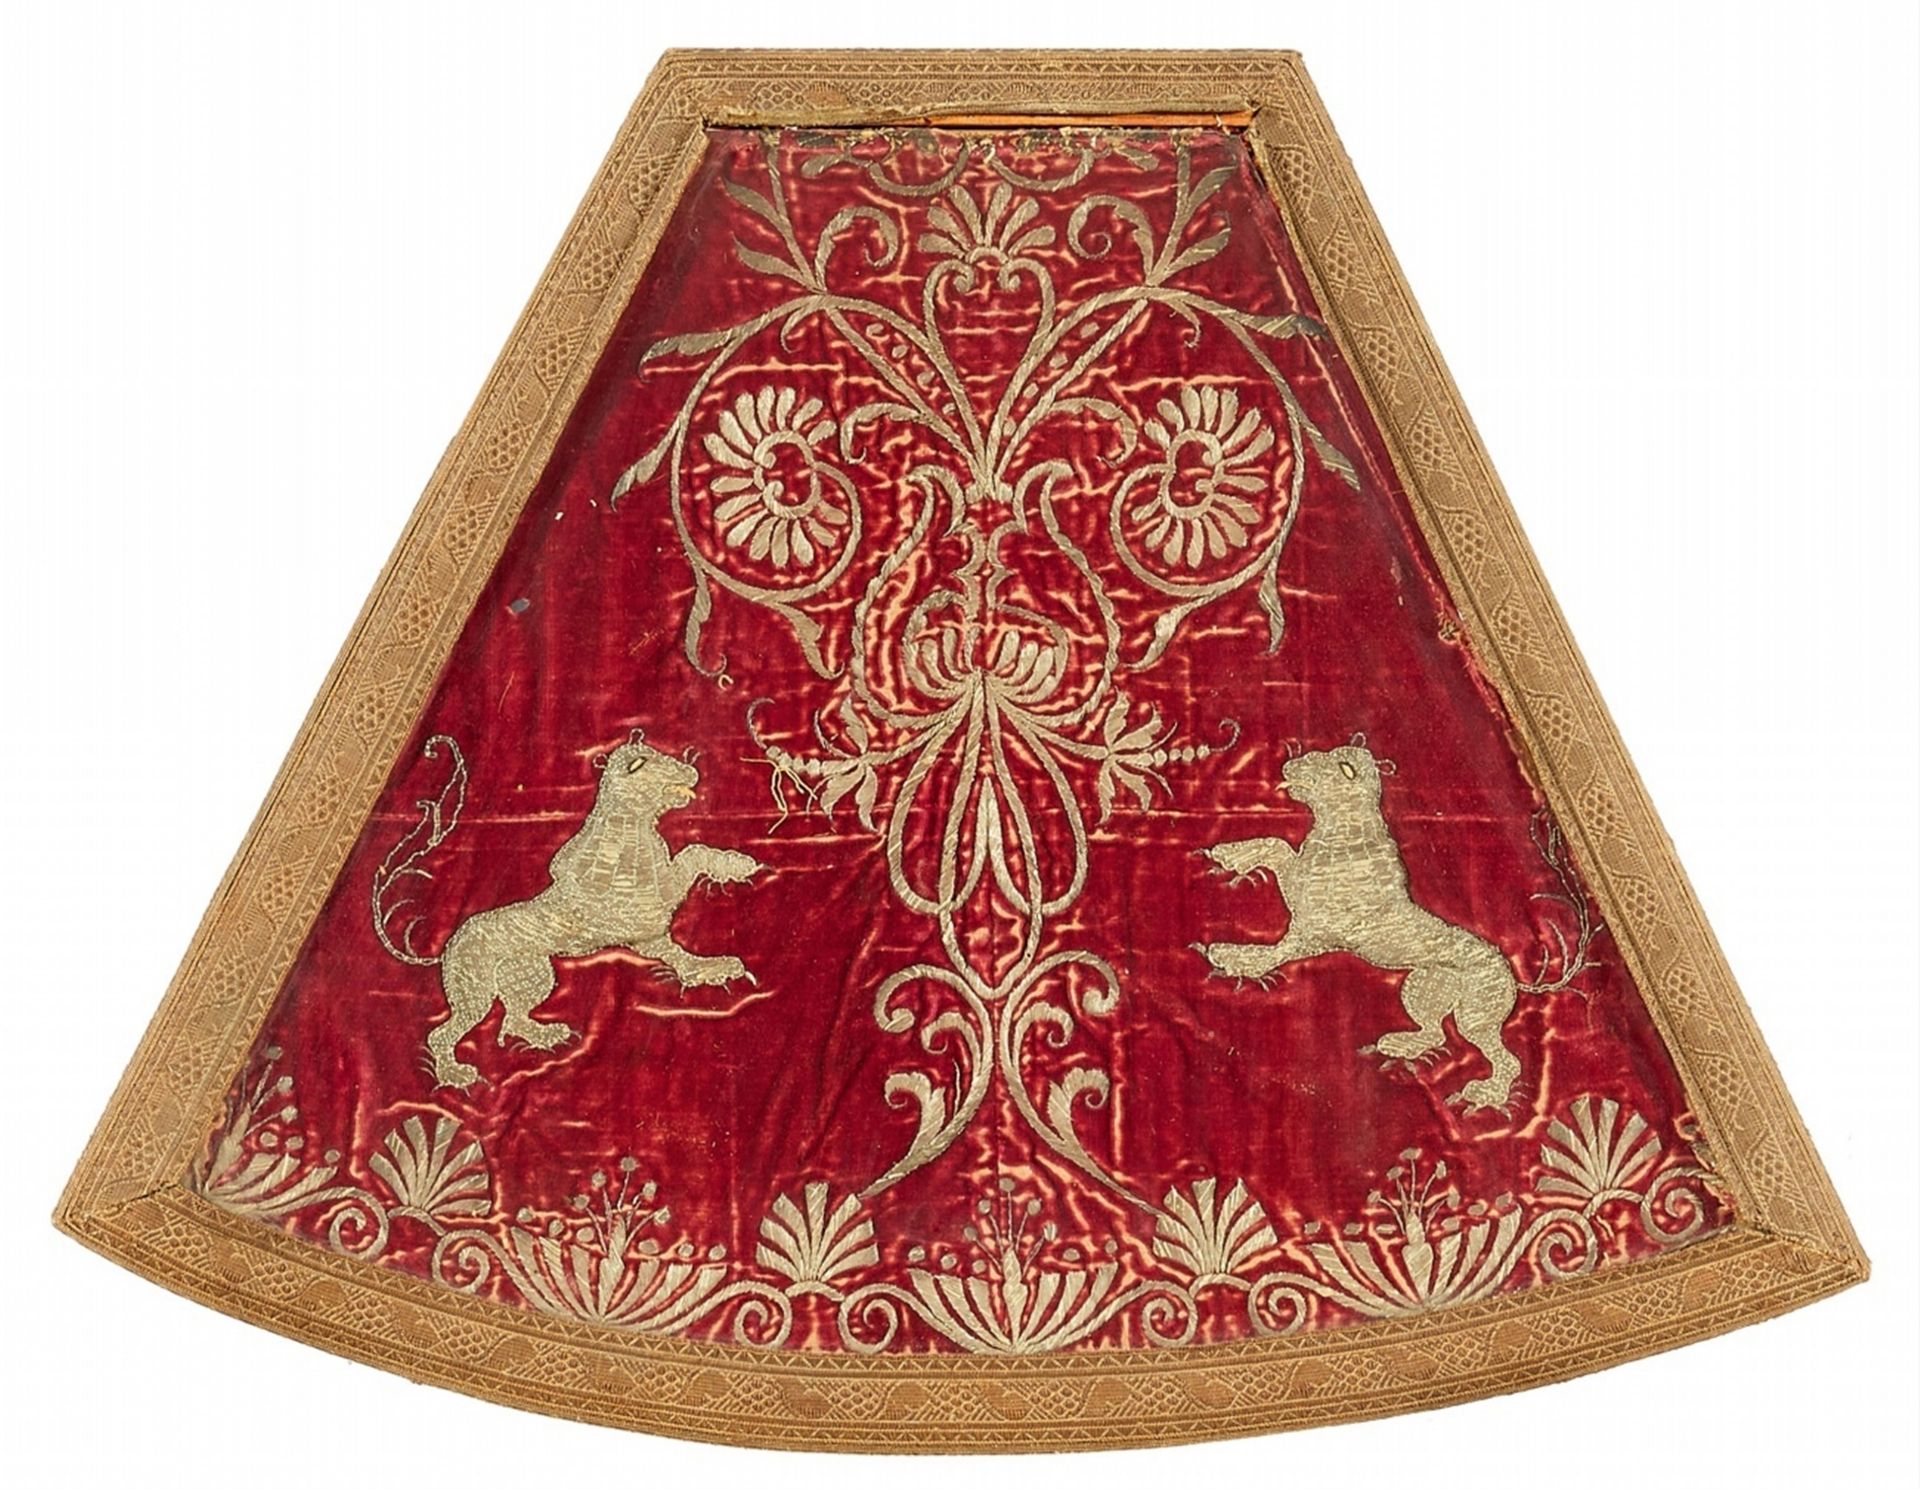 A Spanish embroidered cope ornament